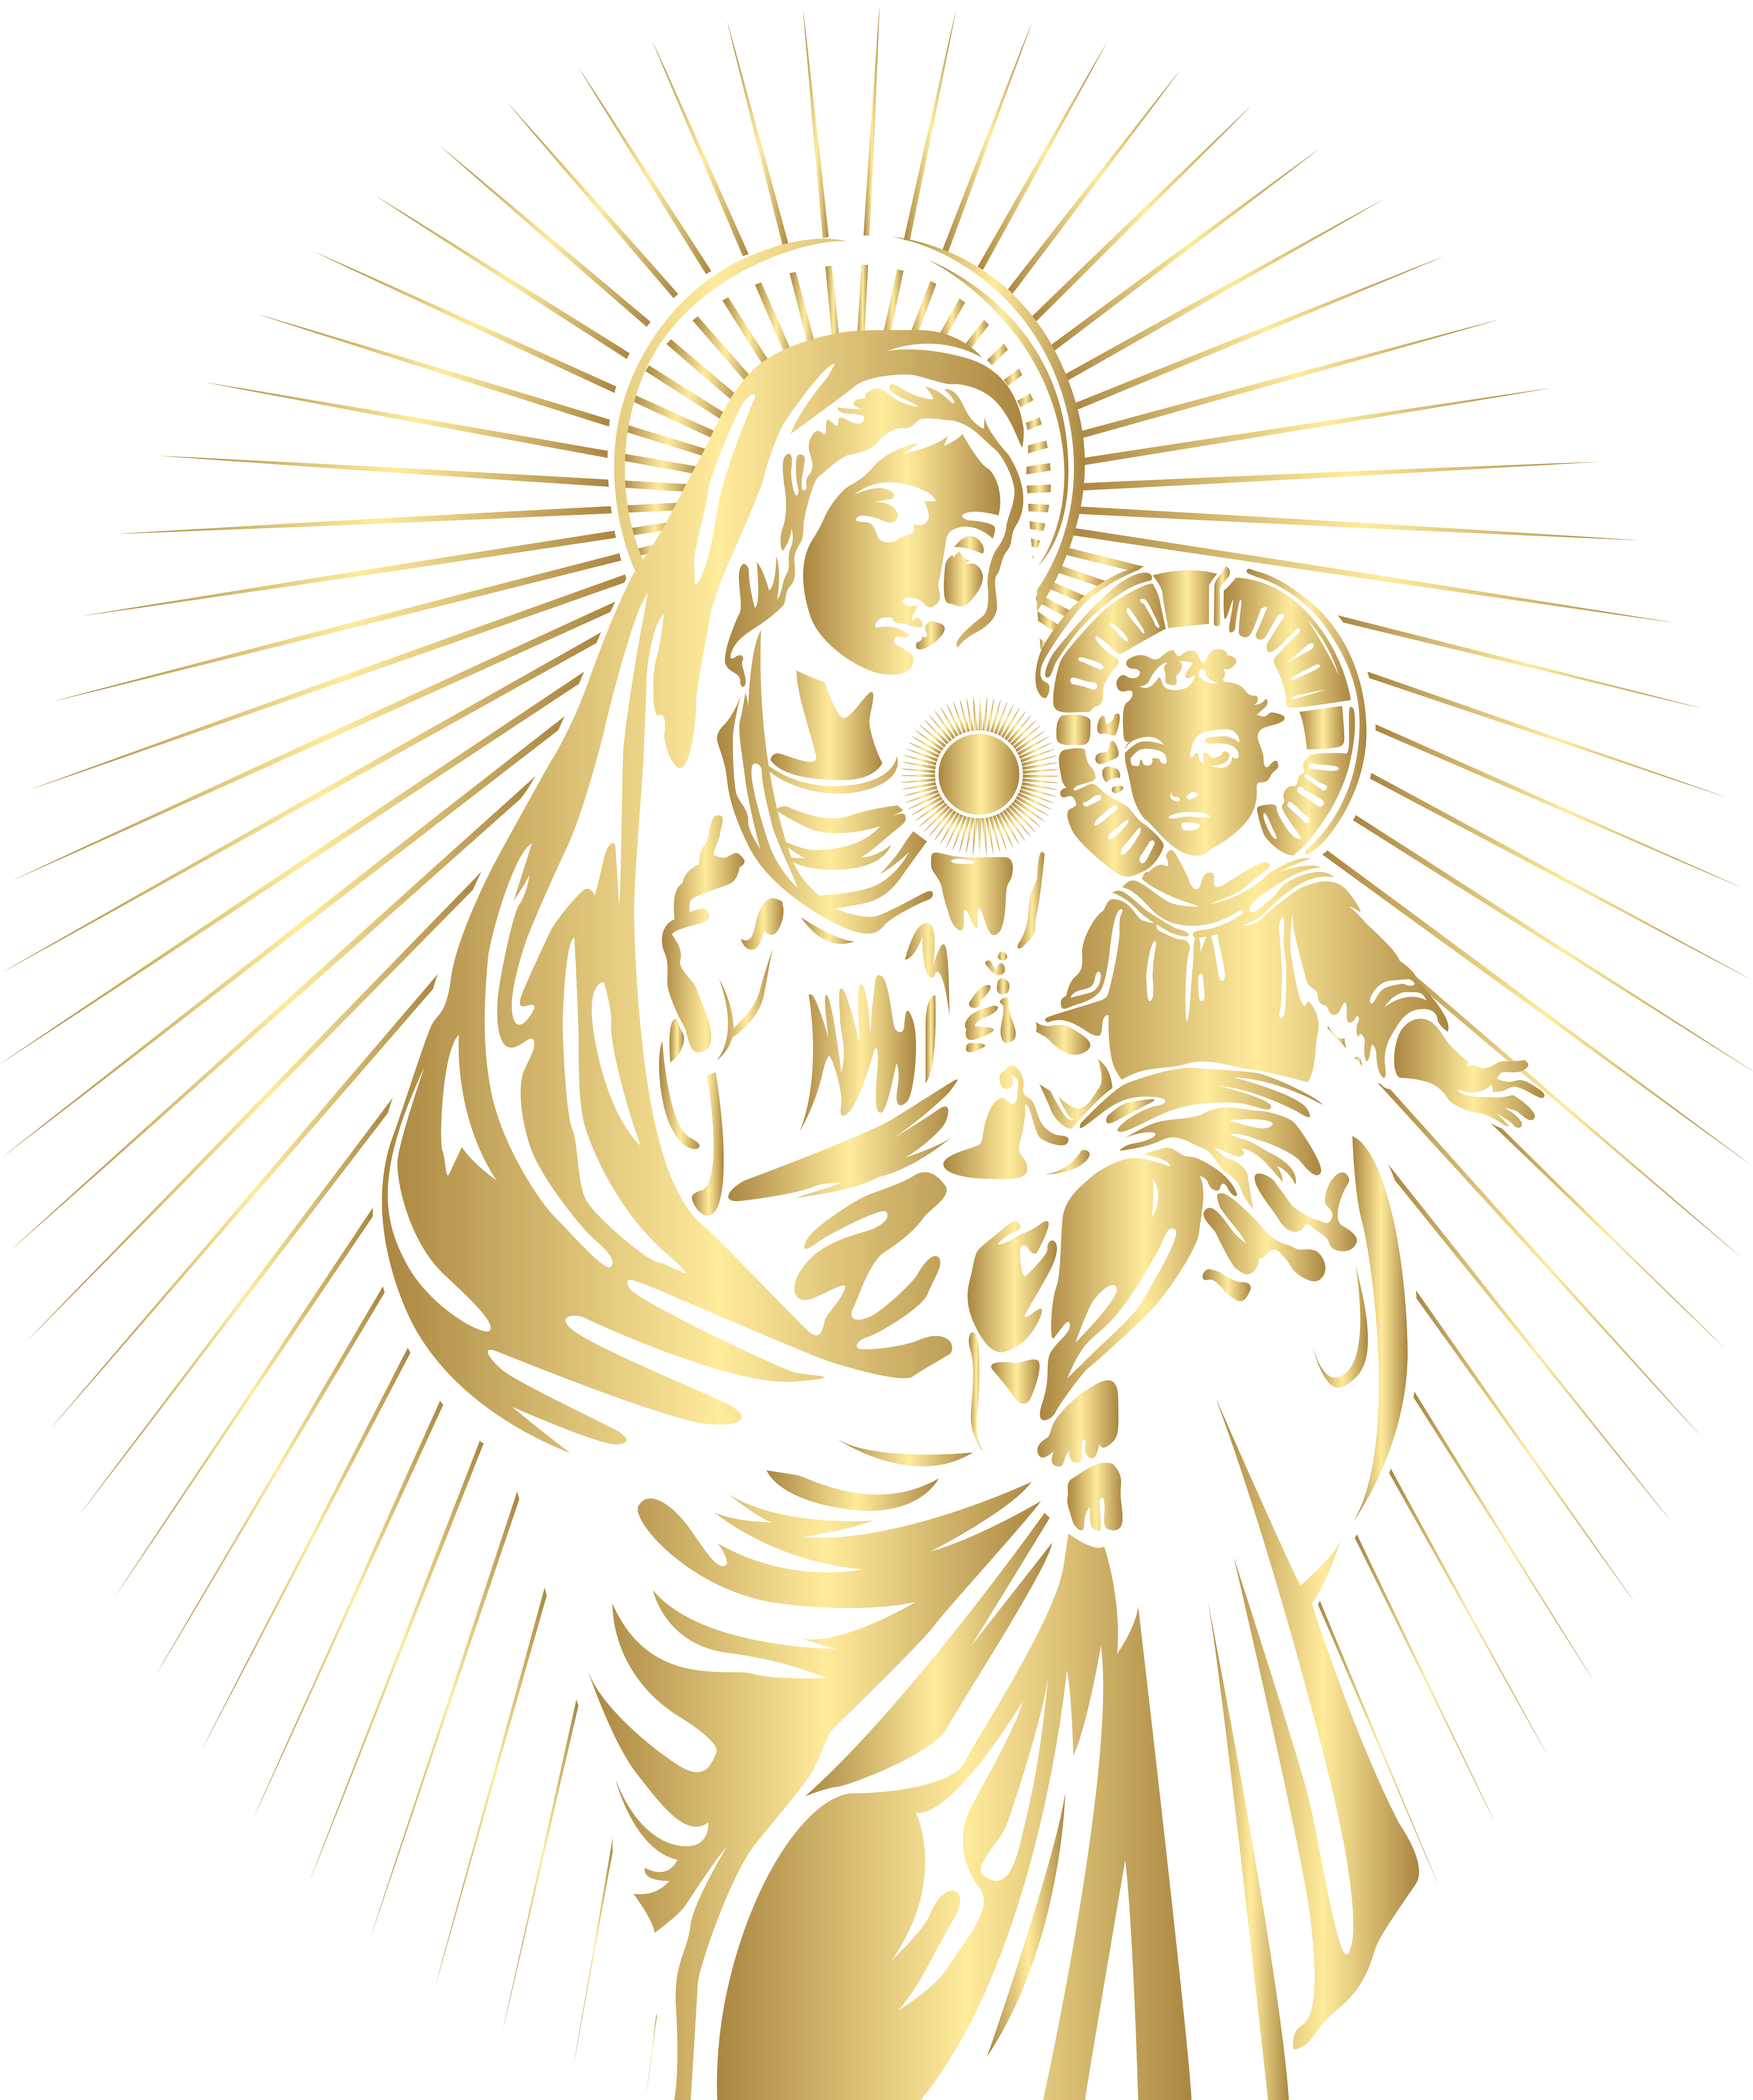 Manger clipart birthplace jesus. Blessed virgin mary and